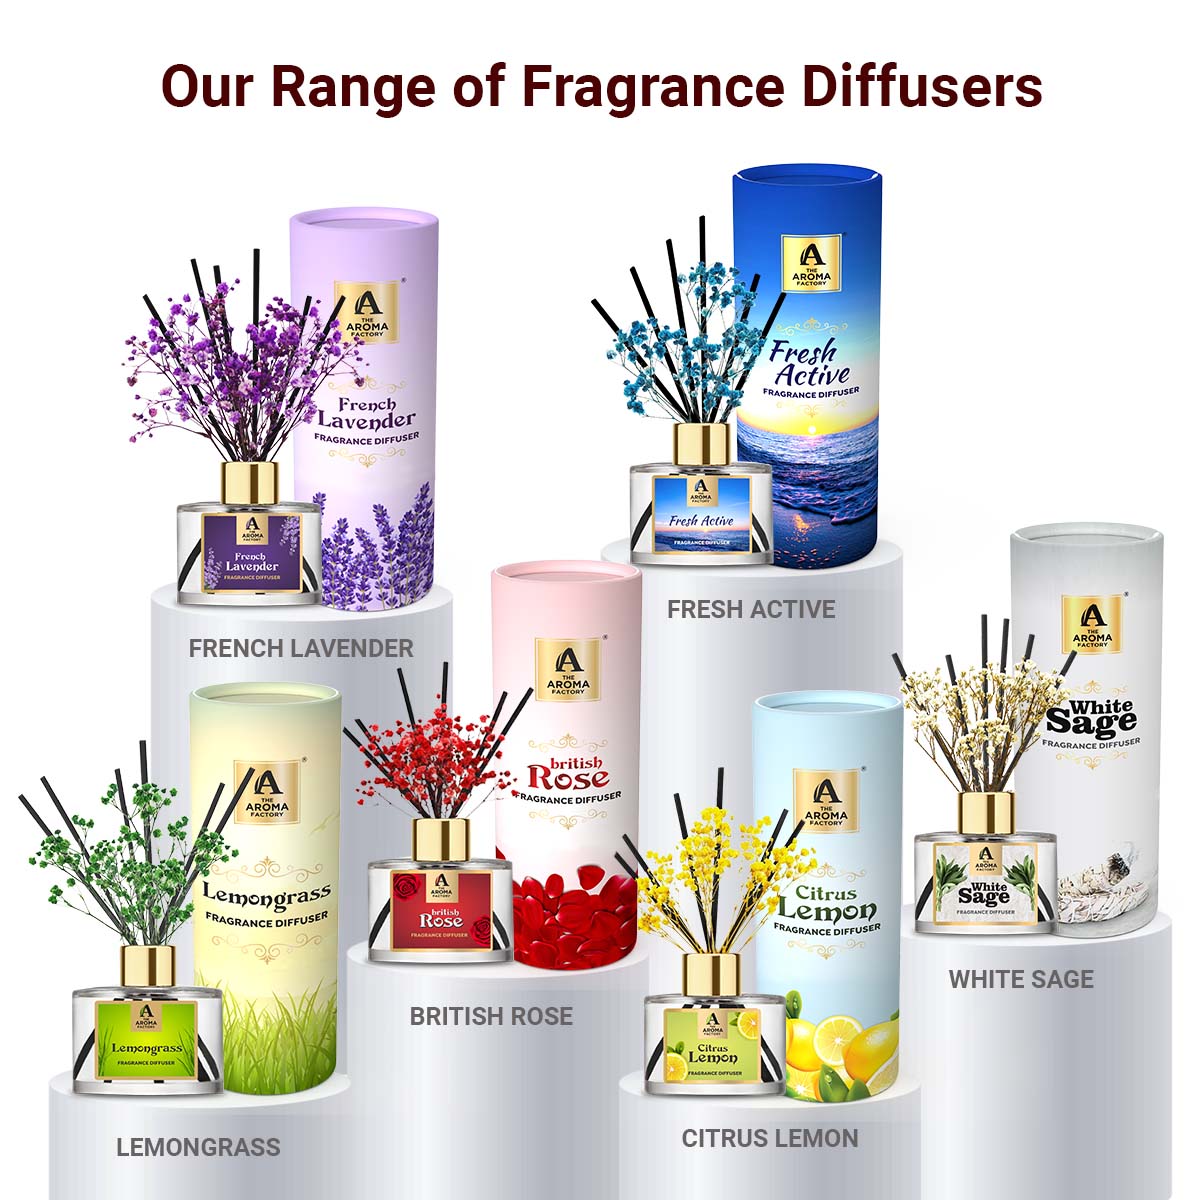 The Aroma Factory Gift for Engagement Ceremony Ring Sagai with Card, French Lavender Fragrance Reed Diffuser Set (1 Box + 1 Card)